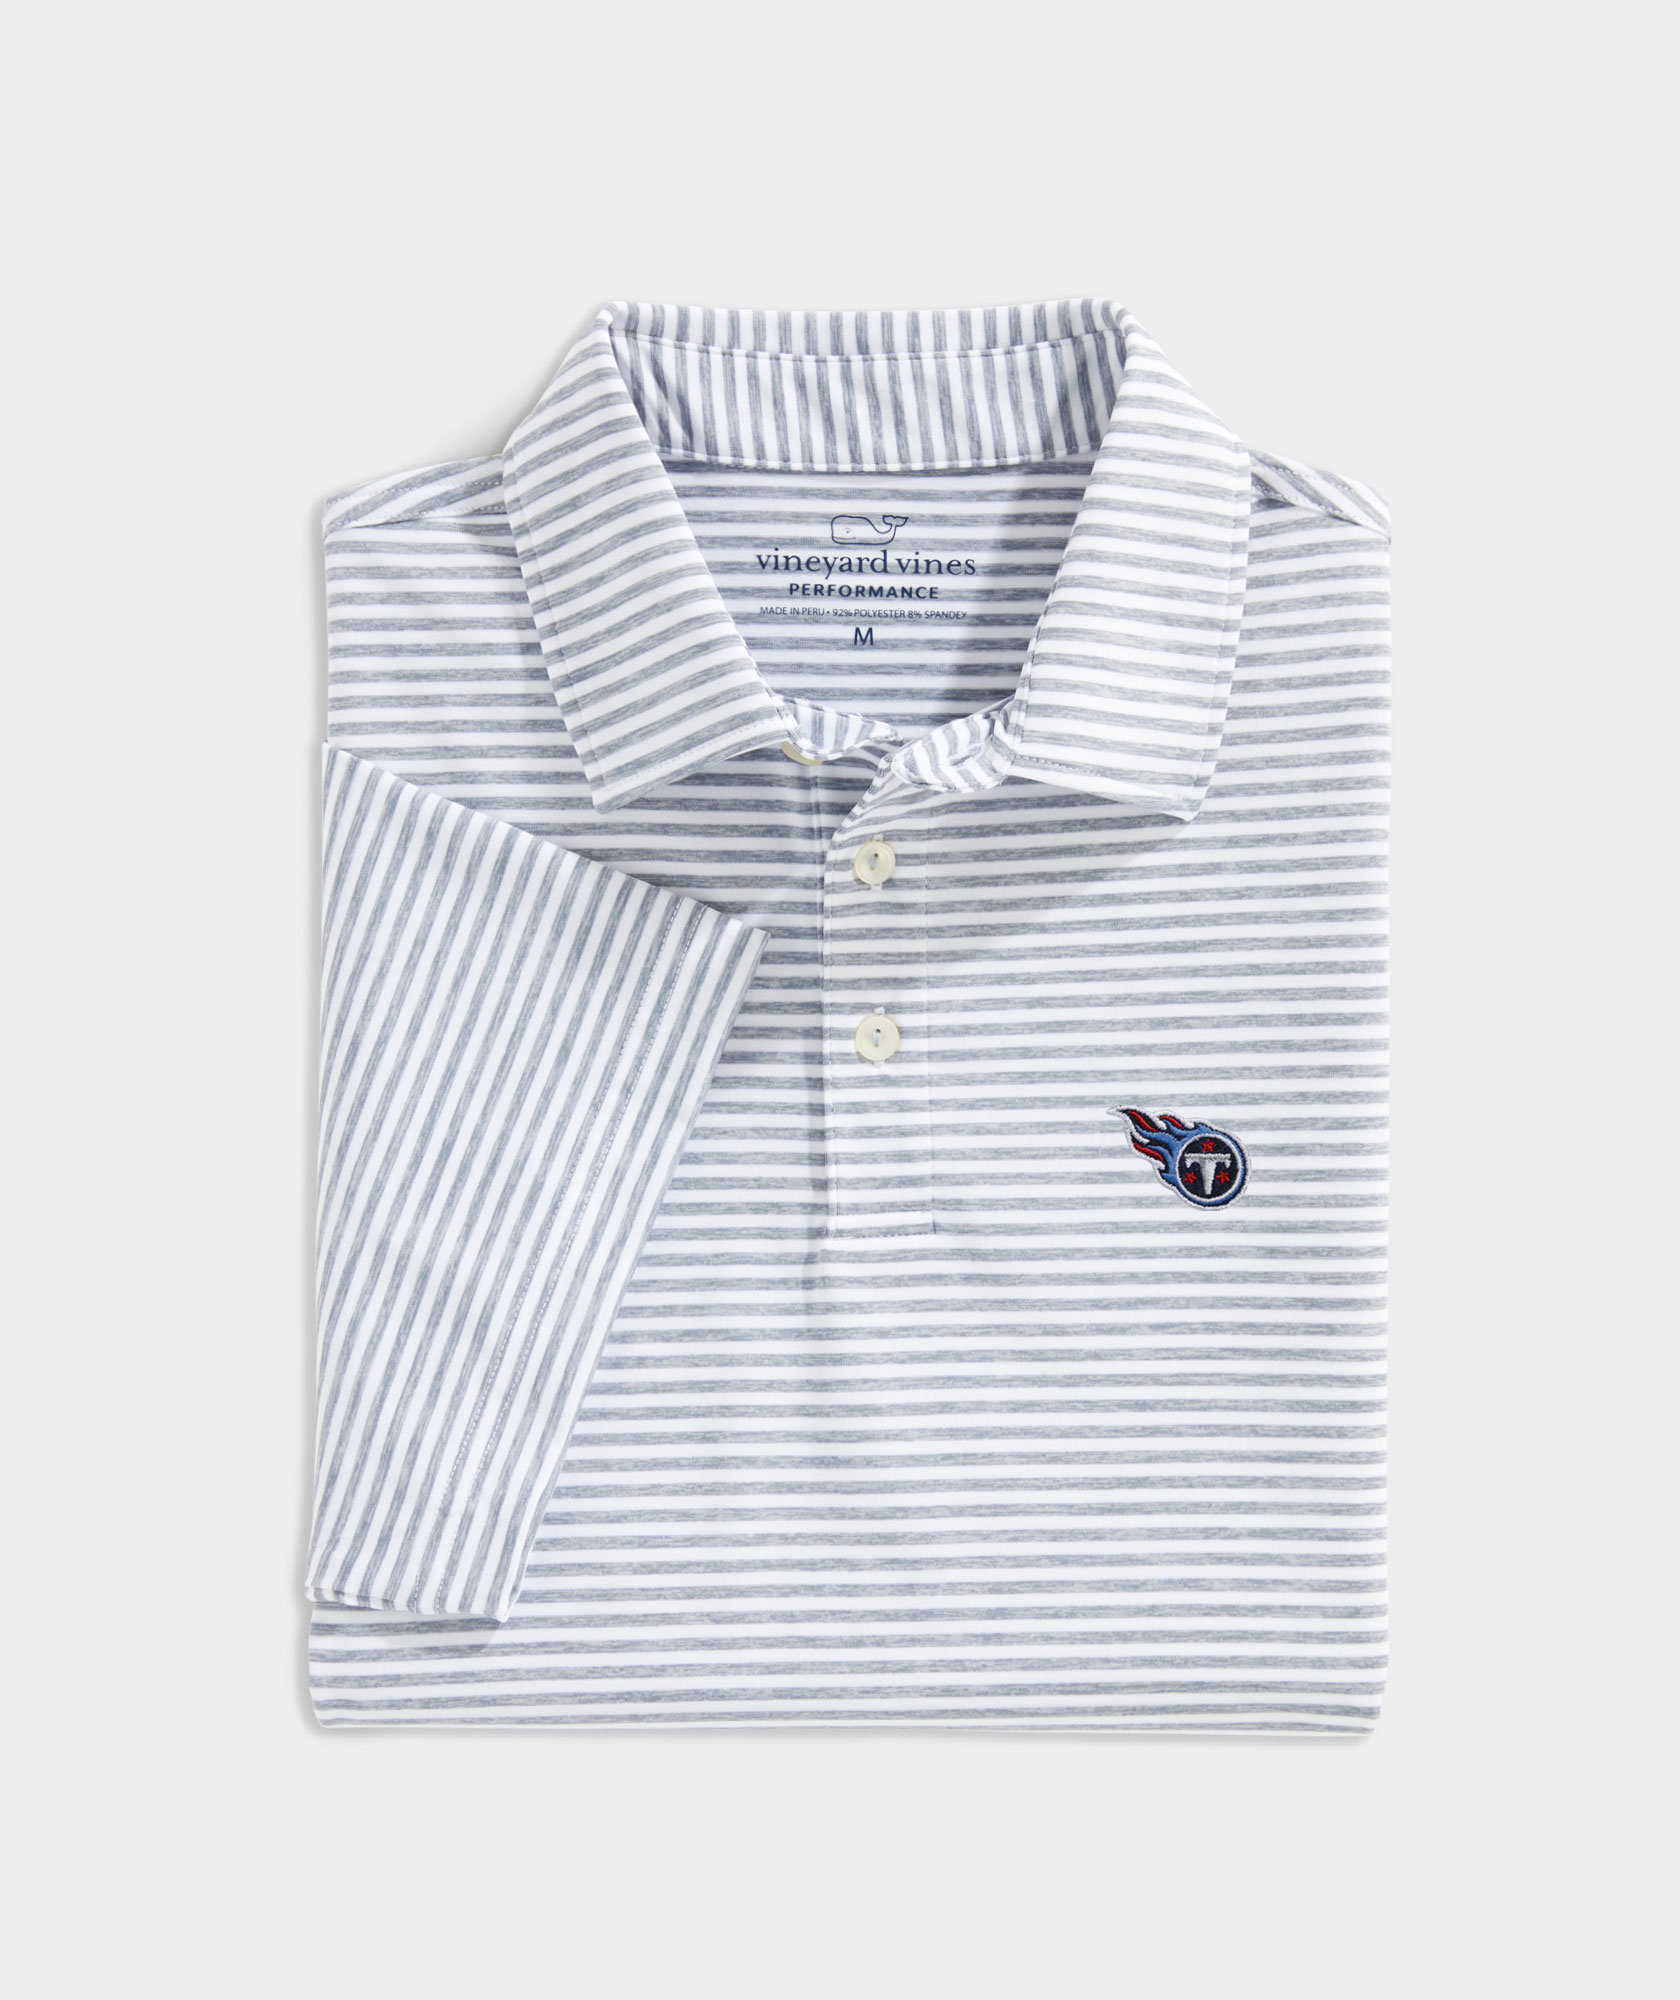 Shop Heathered Winstead Polo - Tennessee Titans at vineyard vines